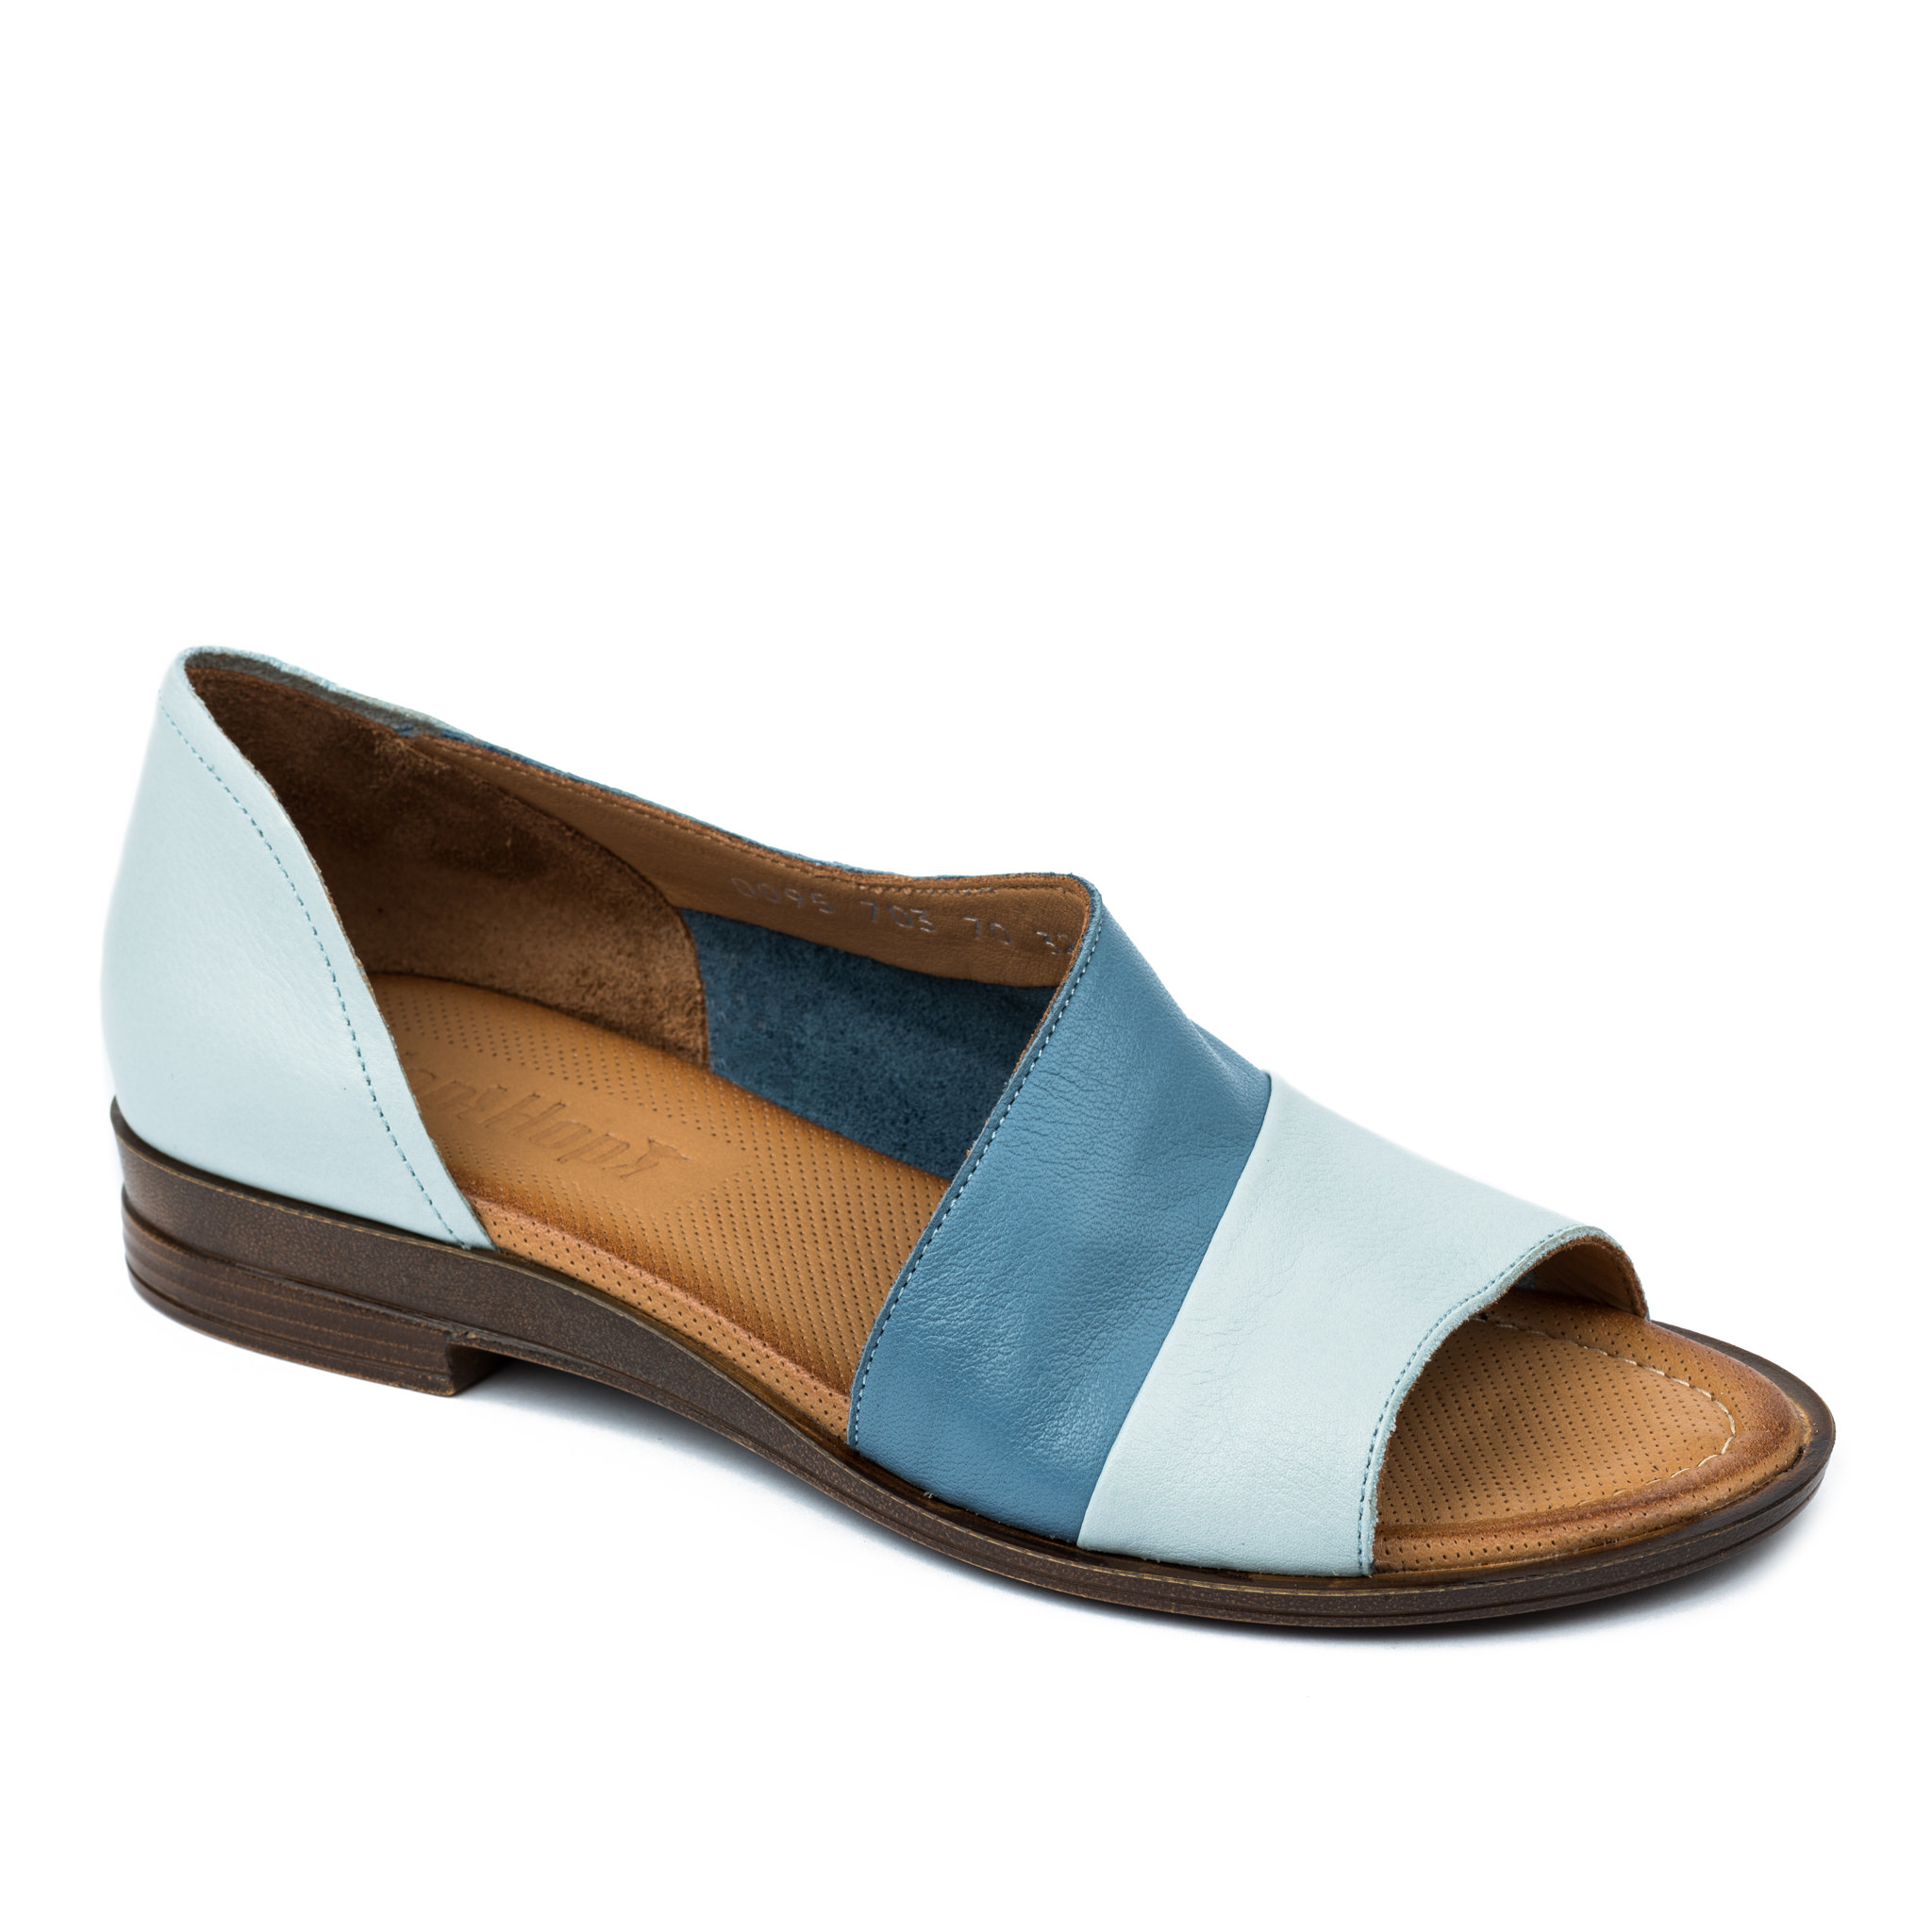 Leather sandals A706 - BLUE